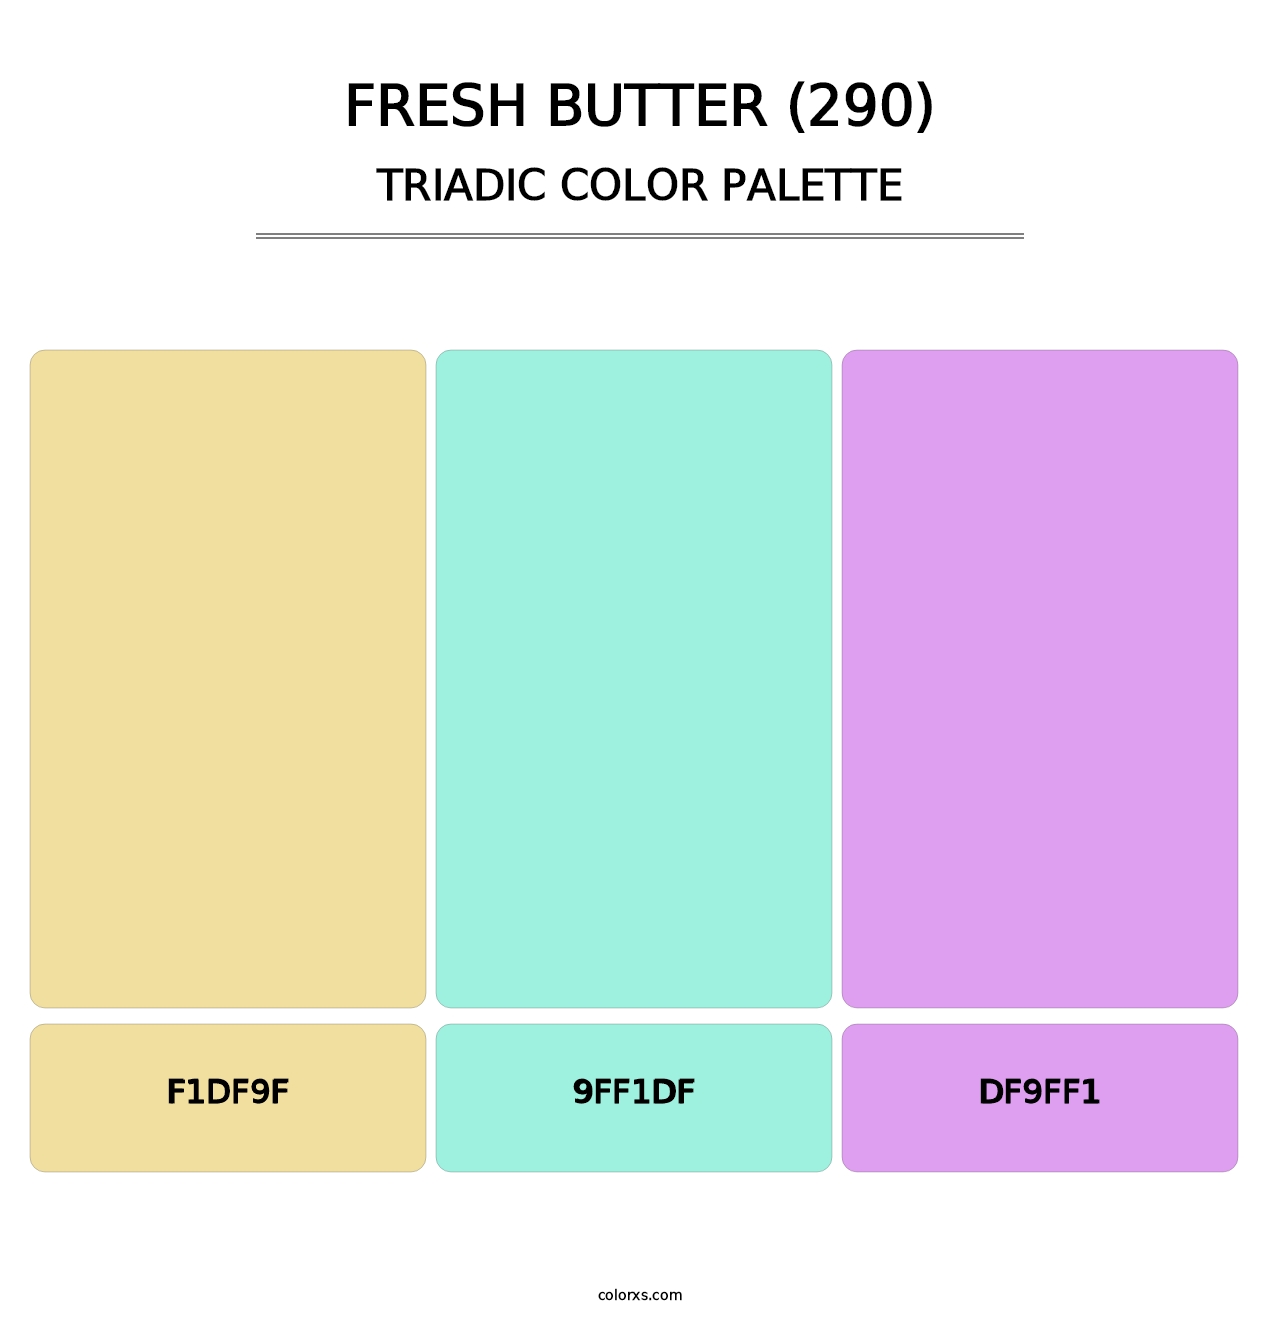 Fresh Butter (290) - Triadic Color Palette